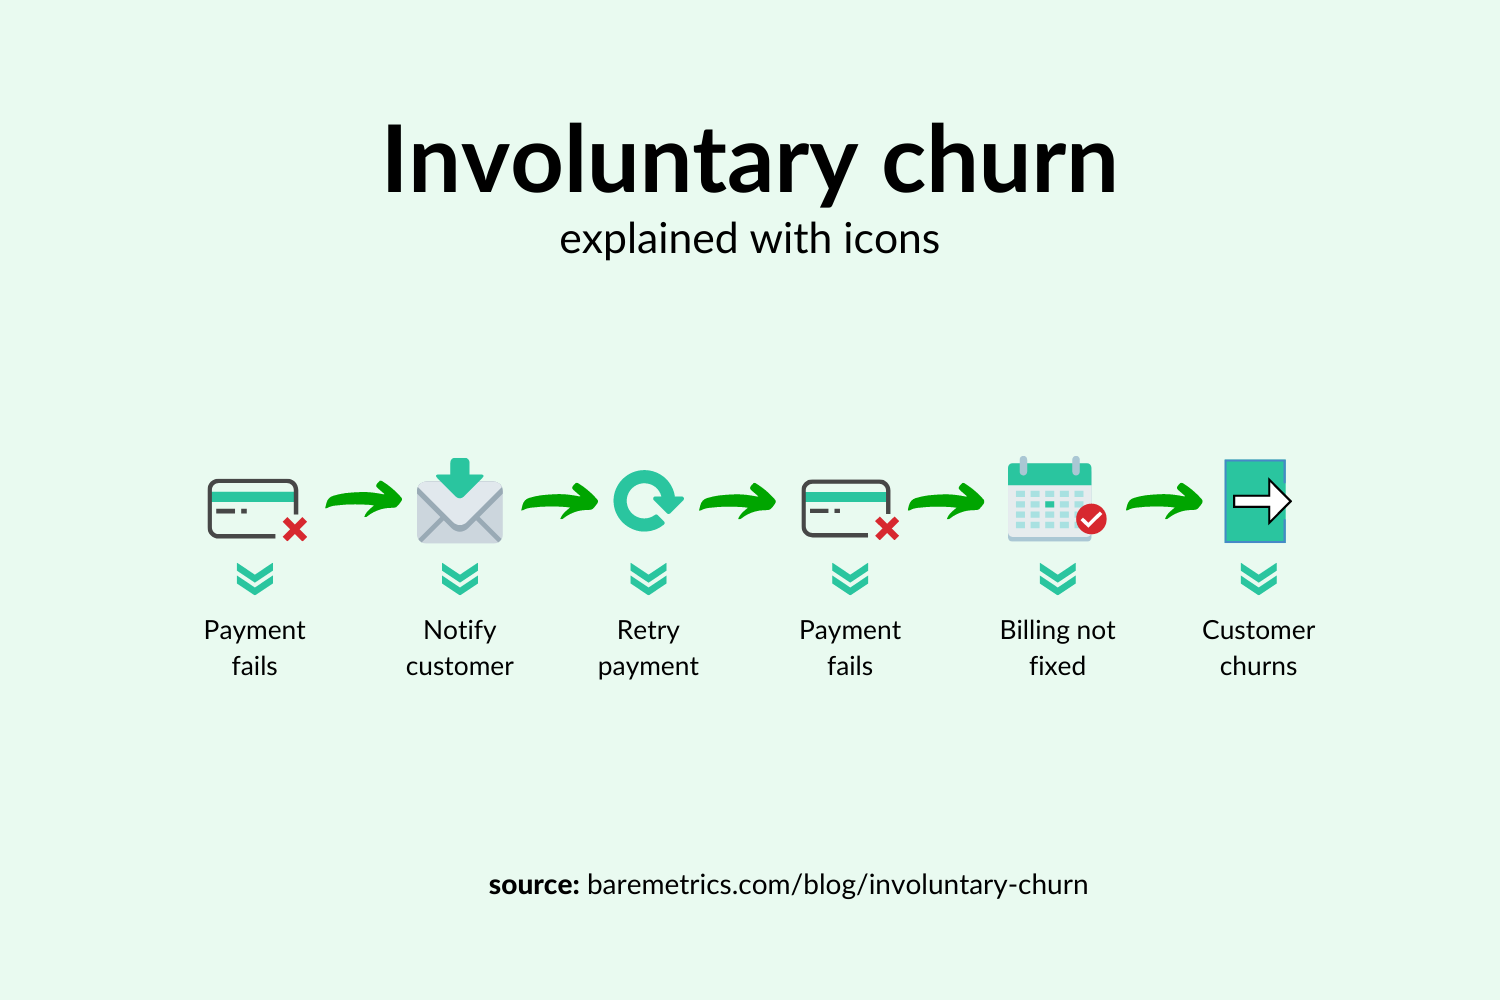 7 Strategies That Are Proven to Reduce Involuntary Churn (And Help Win Your Customers Over)